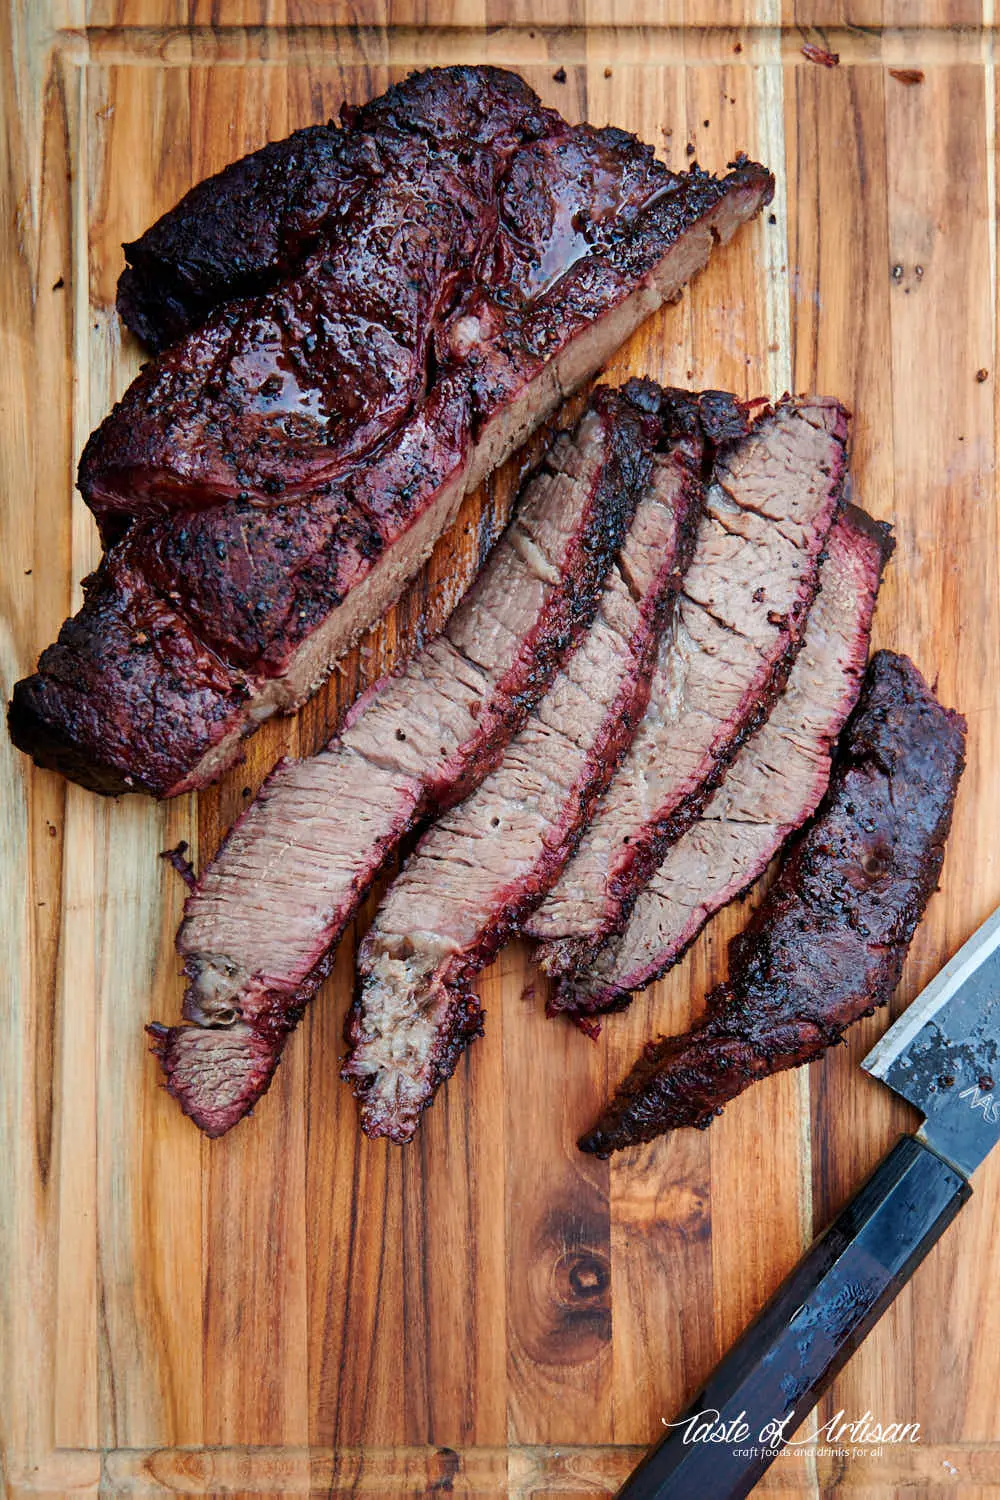 chuck roast smoked like brisket - What is a good substitute for brisket when smoking